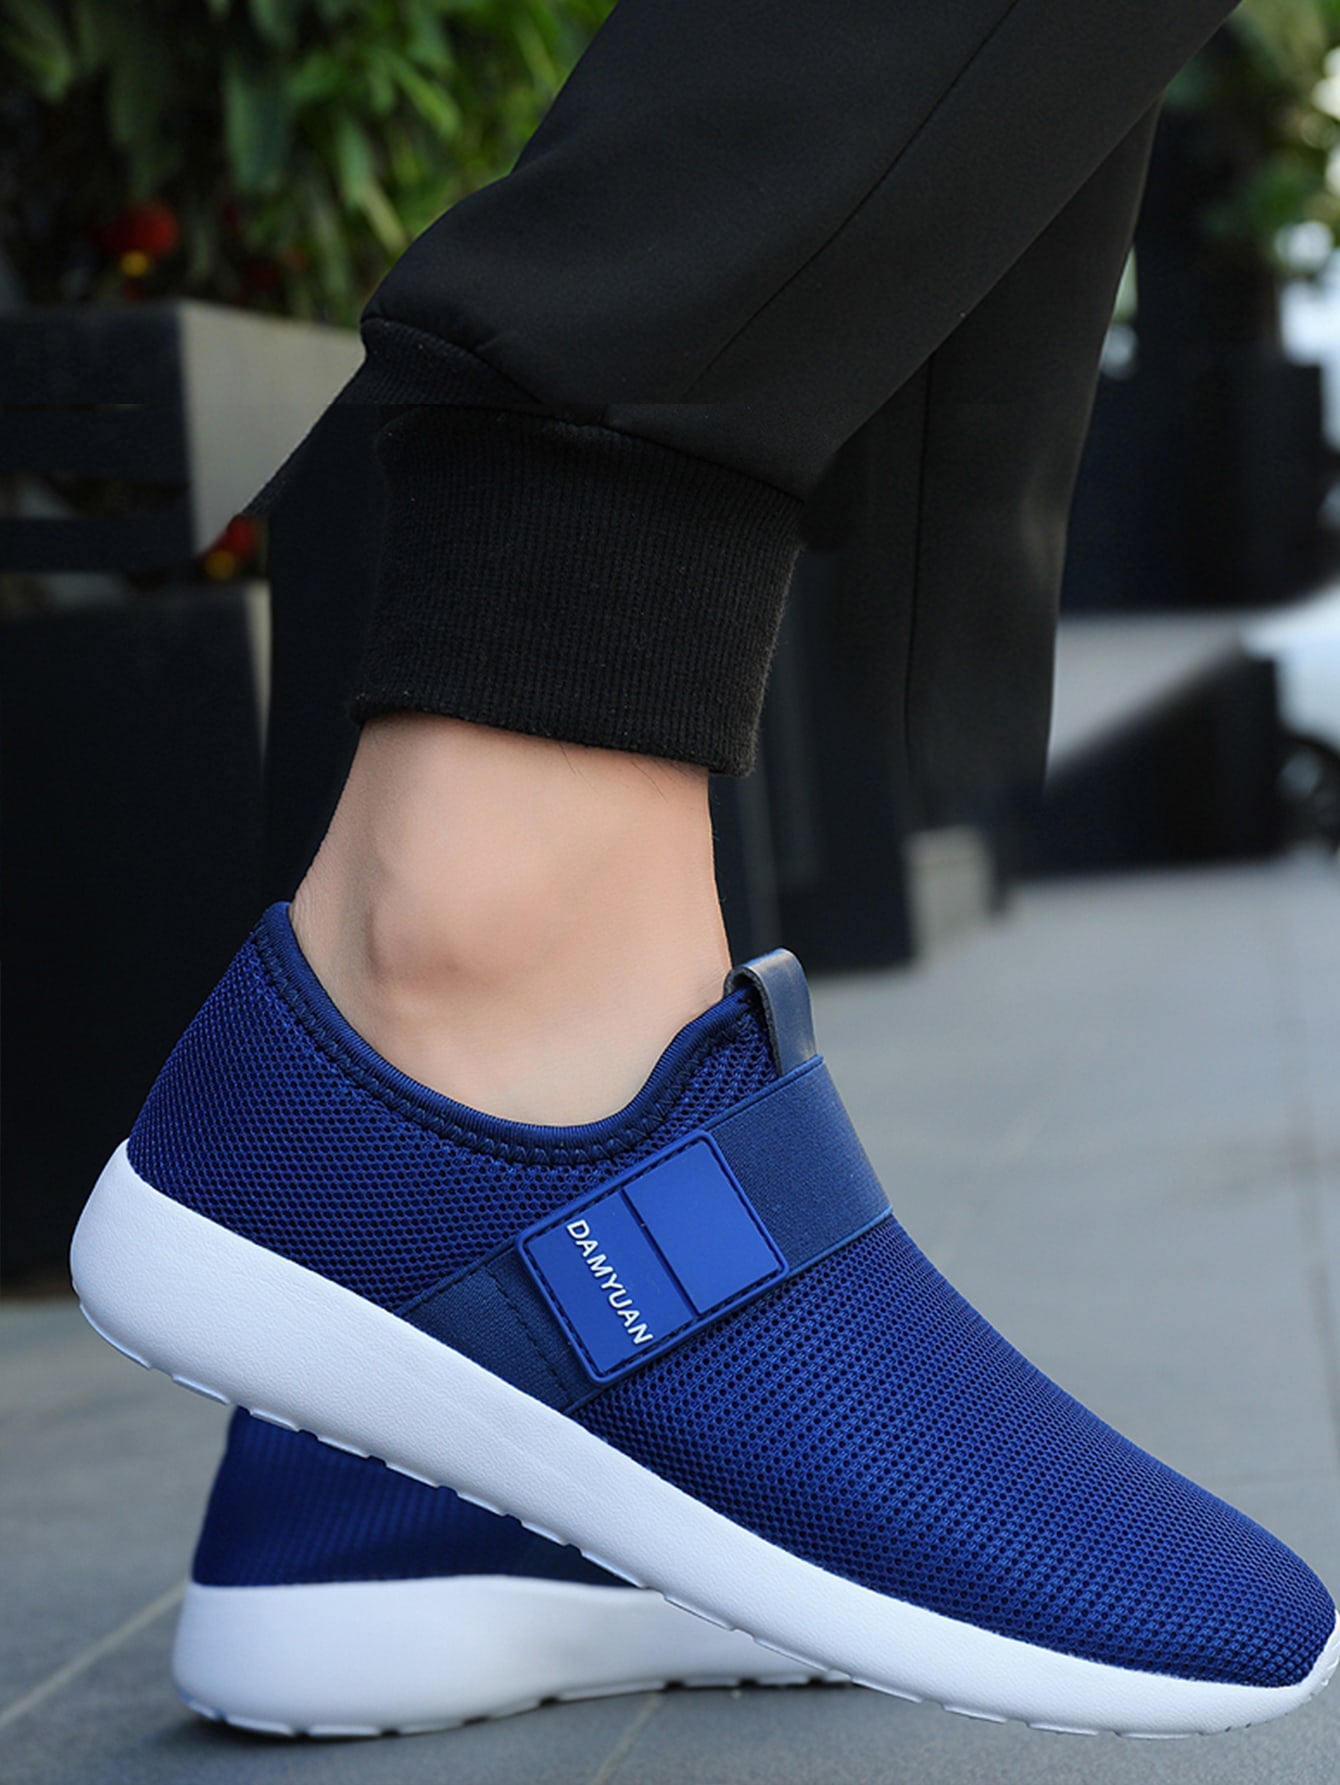 Mens Blue Slip On Casual Shoes Lightweight Work Shoes Trainers Breathable Non Slip Mesh Walking Gym Shoes Comfortable Workout Sneakers